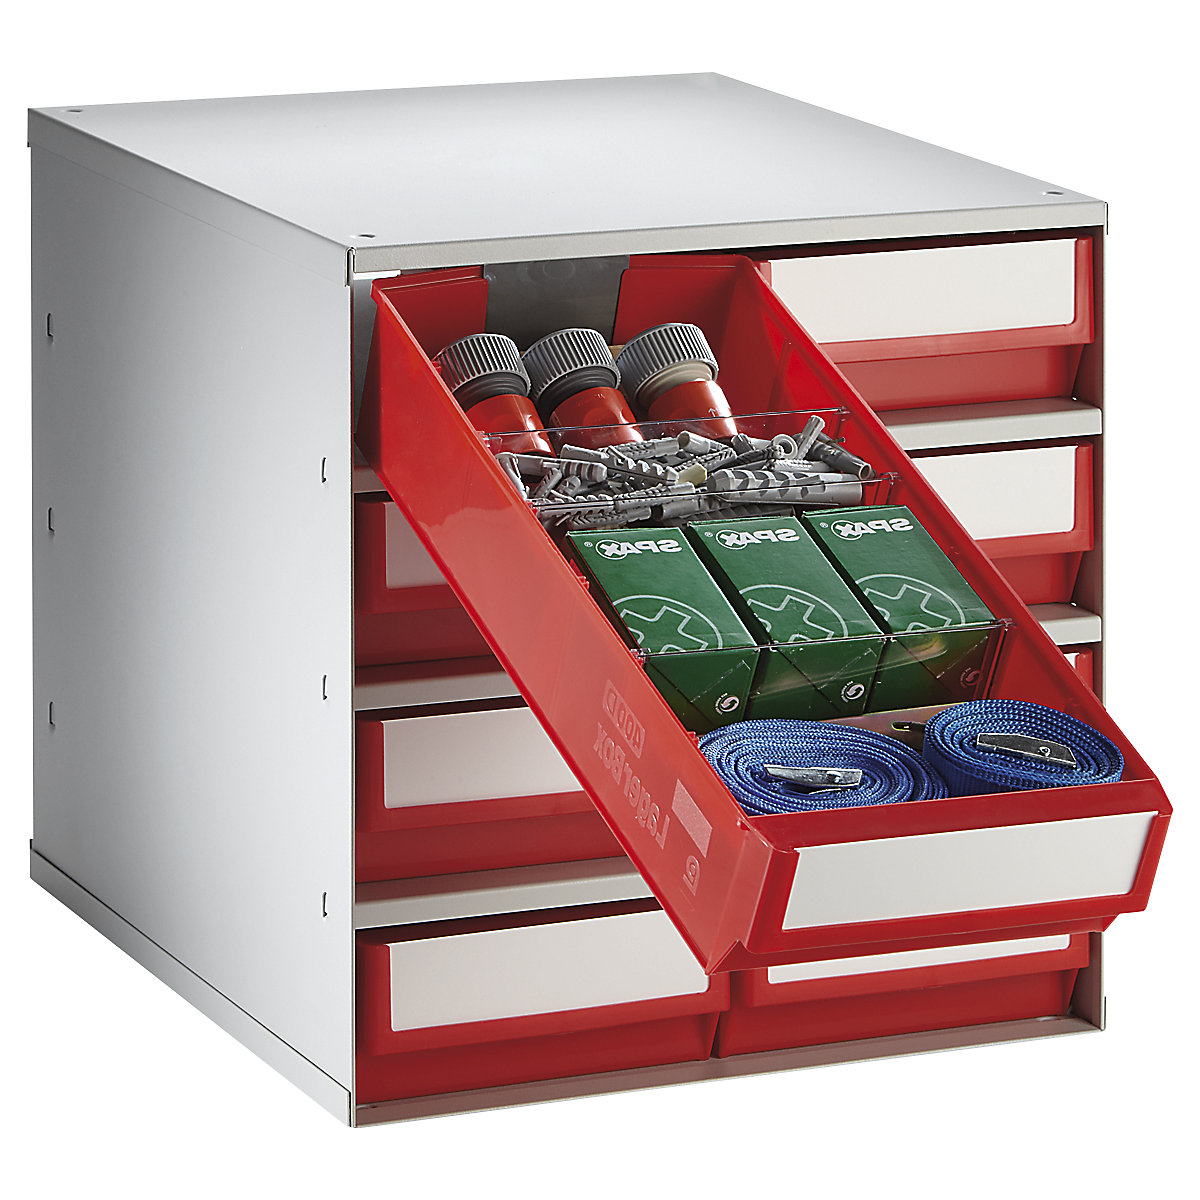 Drawer cabinet, max. housing load 75 kg, HxWxD 395 x 376 x 400 mm, 8 drawers, red drawers-3